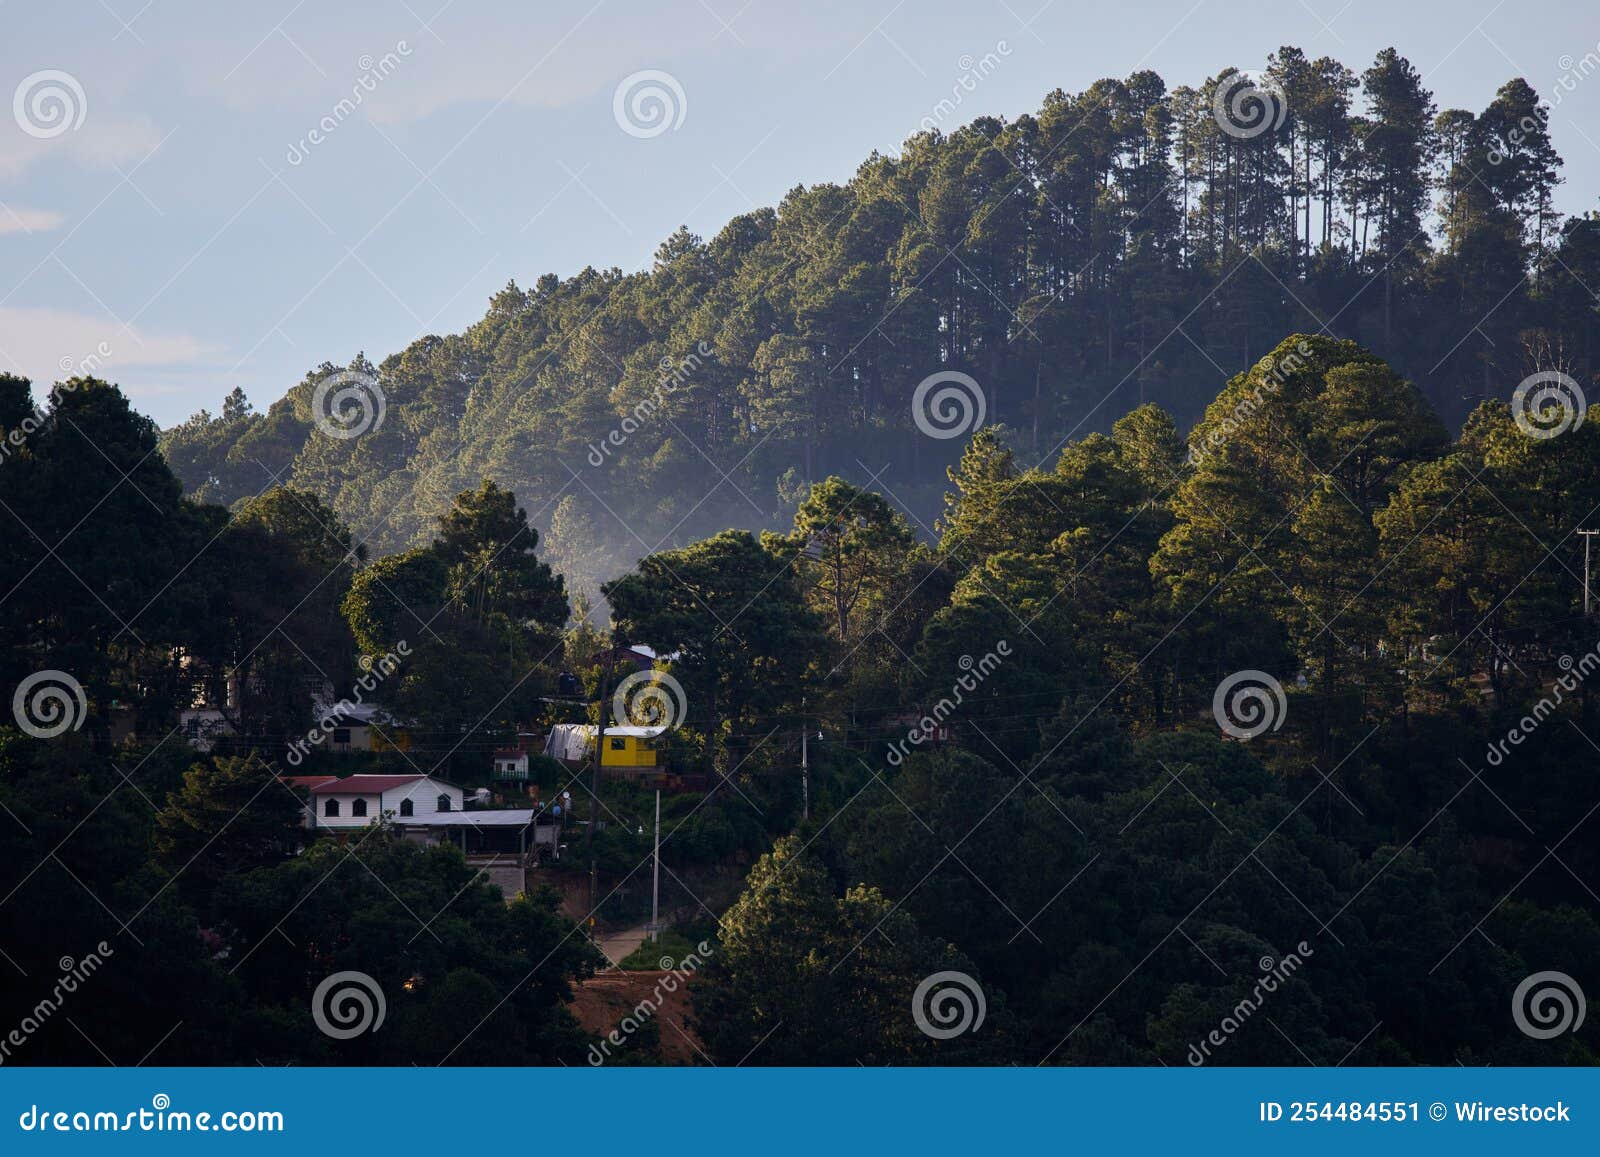 houses are surrounded by dense trees under the blue sky in san jose del pacifico